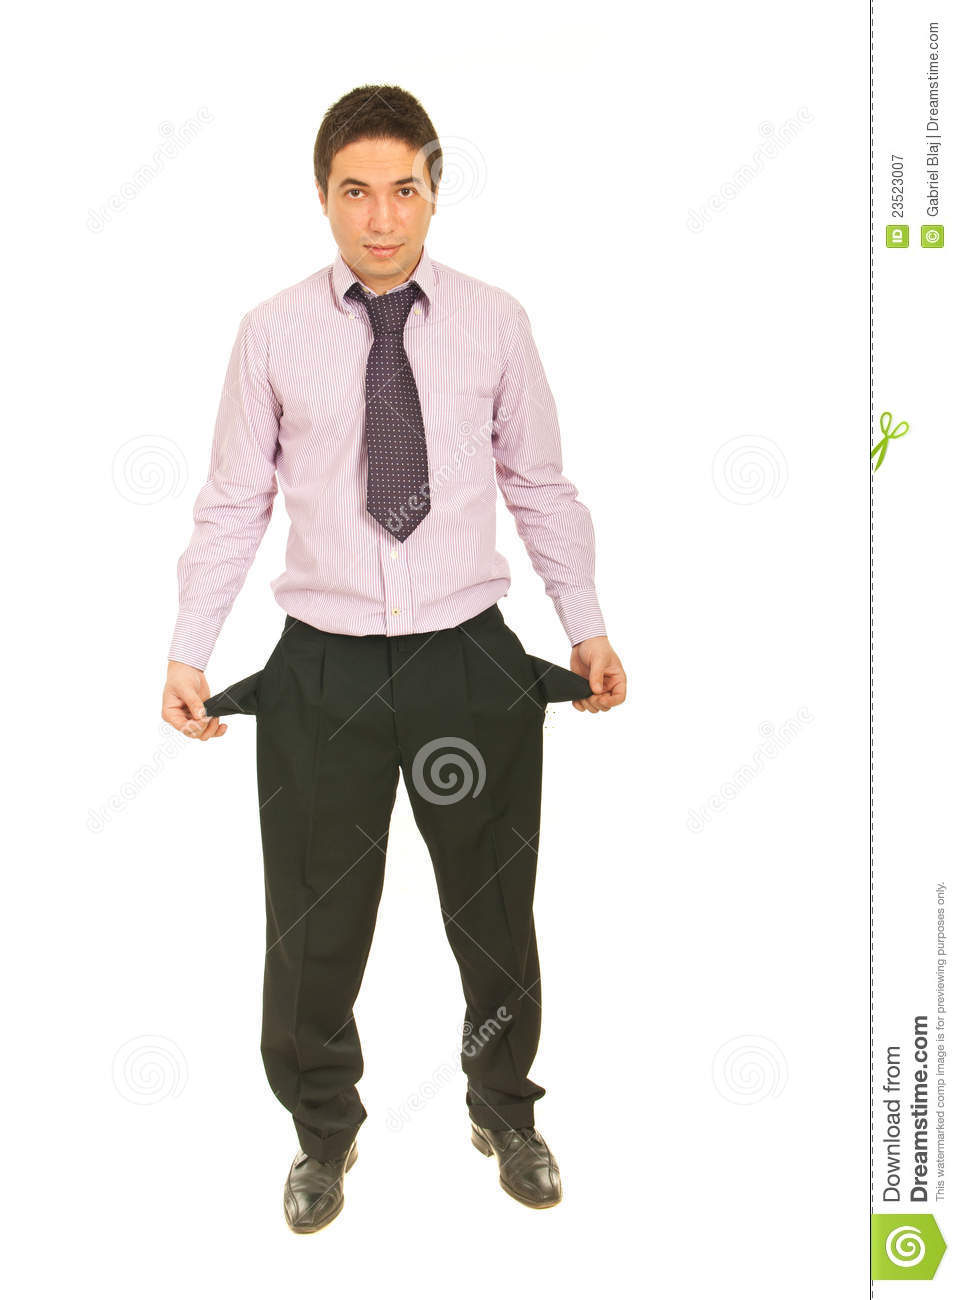 Business Man With Empty Pockets Royalty Free Stock Photography   Image    